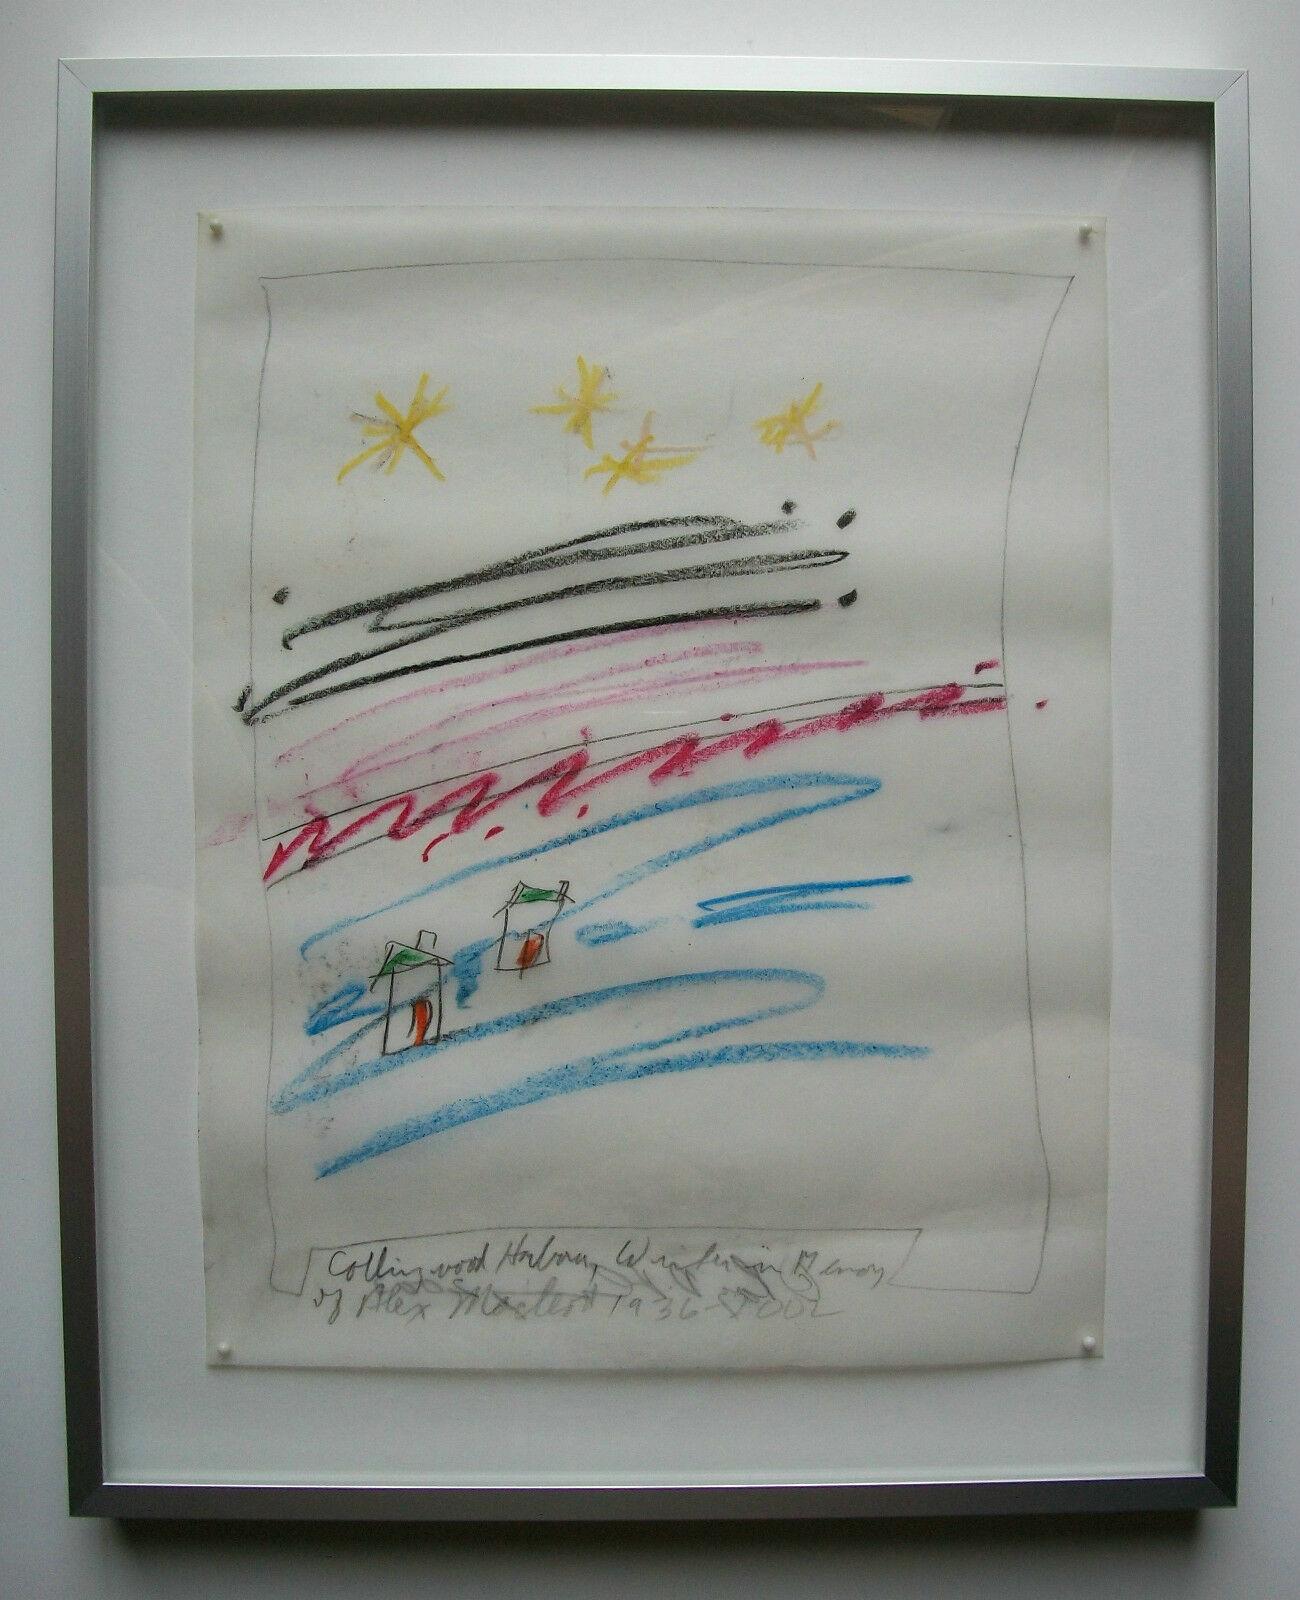 Modern Roy D. Fleming - Contemporary Canadian Graphite Drawing 4. - Signed/Titled/Dated For Sale